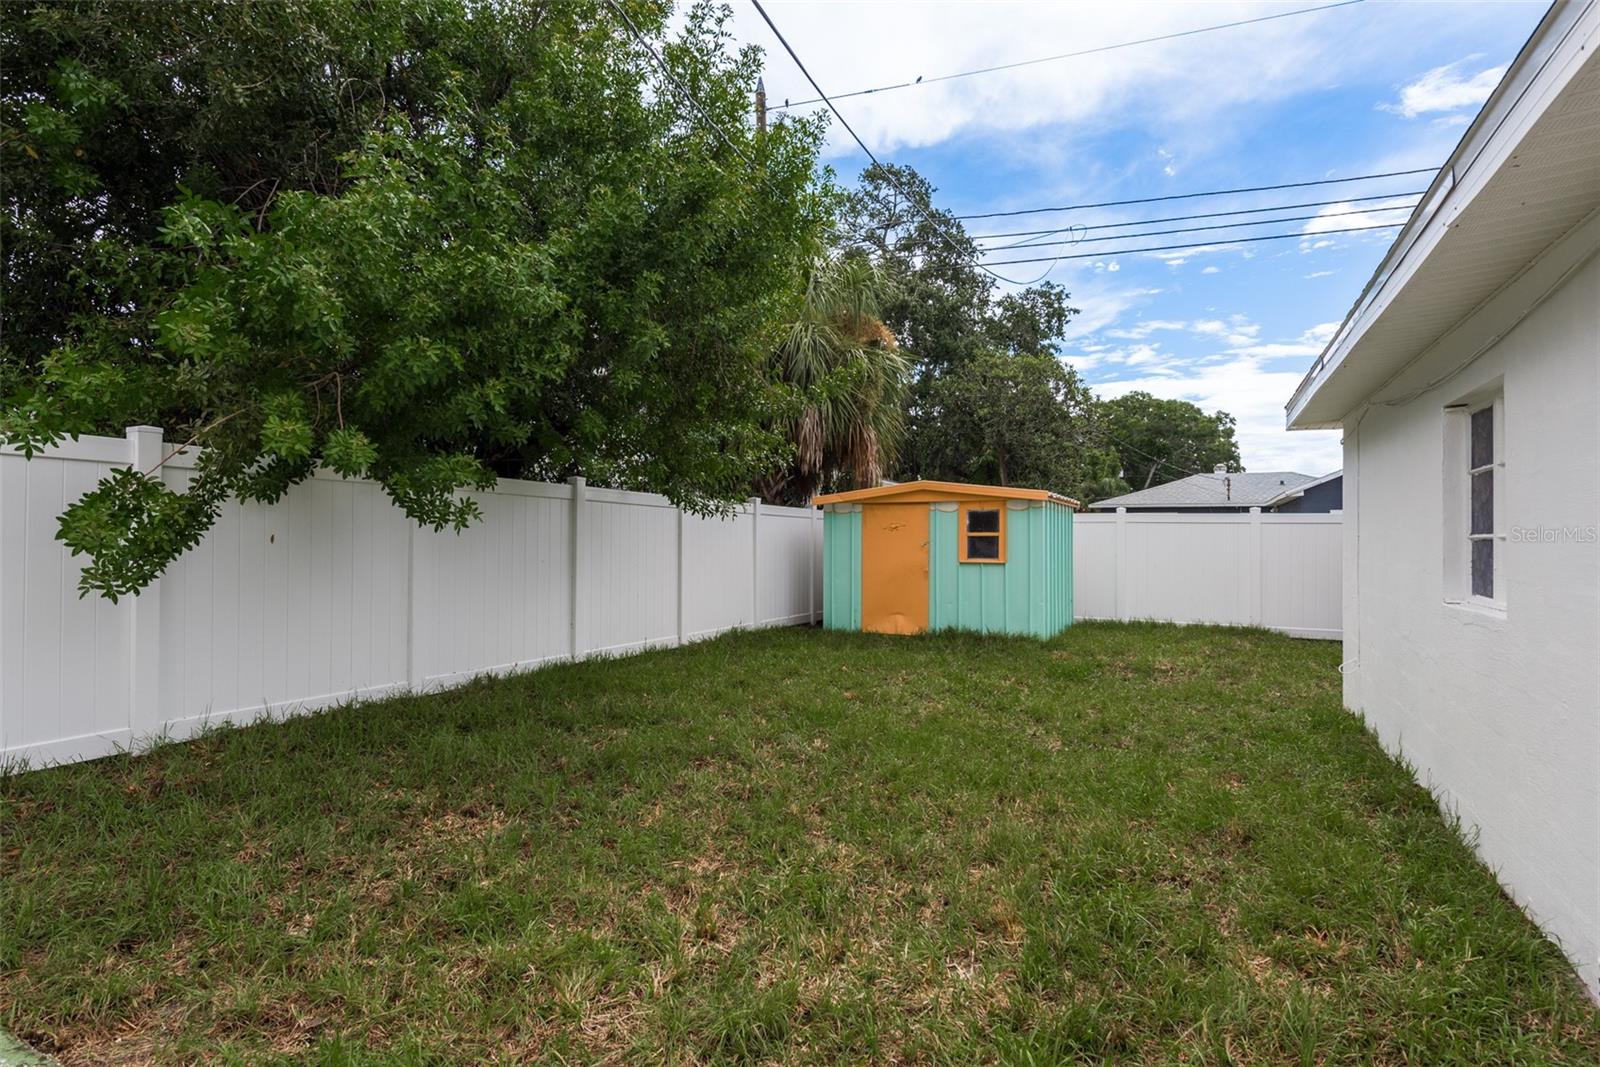 Side yard and shed, -3135 19th St N, St Petersburg, FL